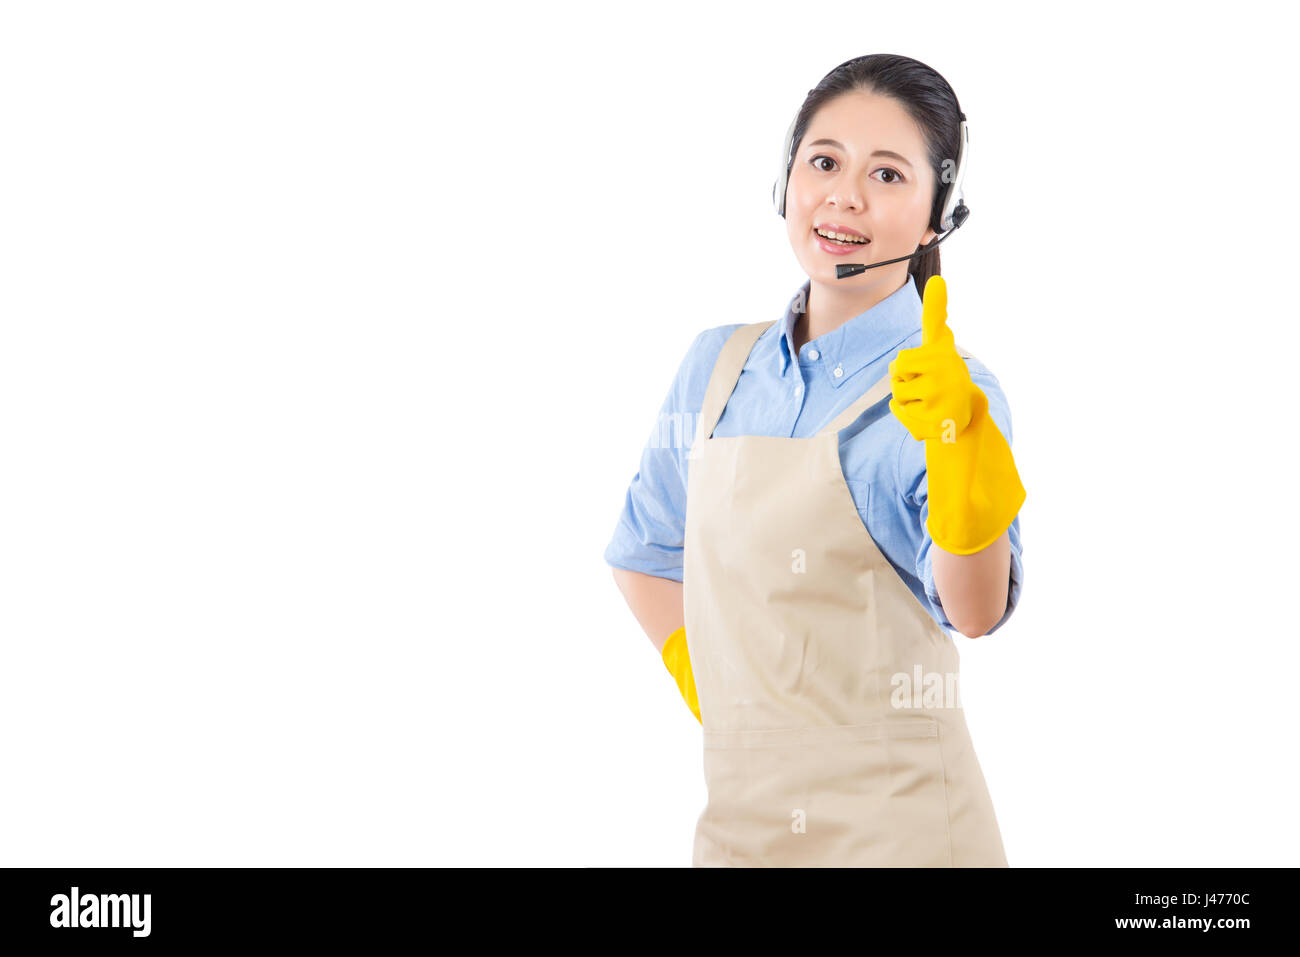 happy teeth smile pretty profession girl showing thumbs up for professional house cleaning online services. isolated on white background. mixed race a Stock Photo